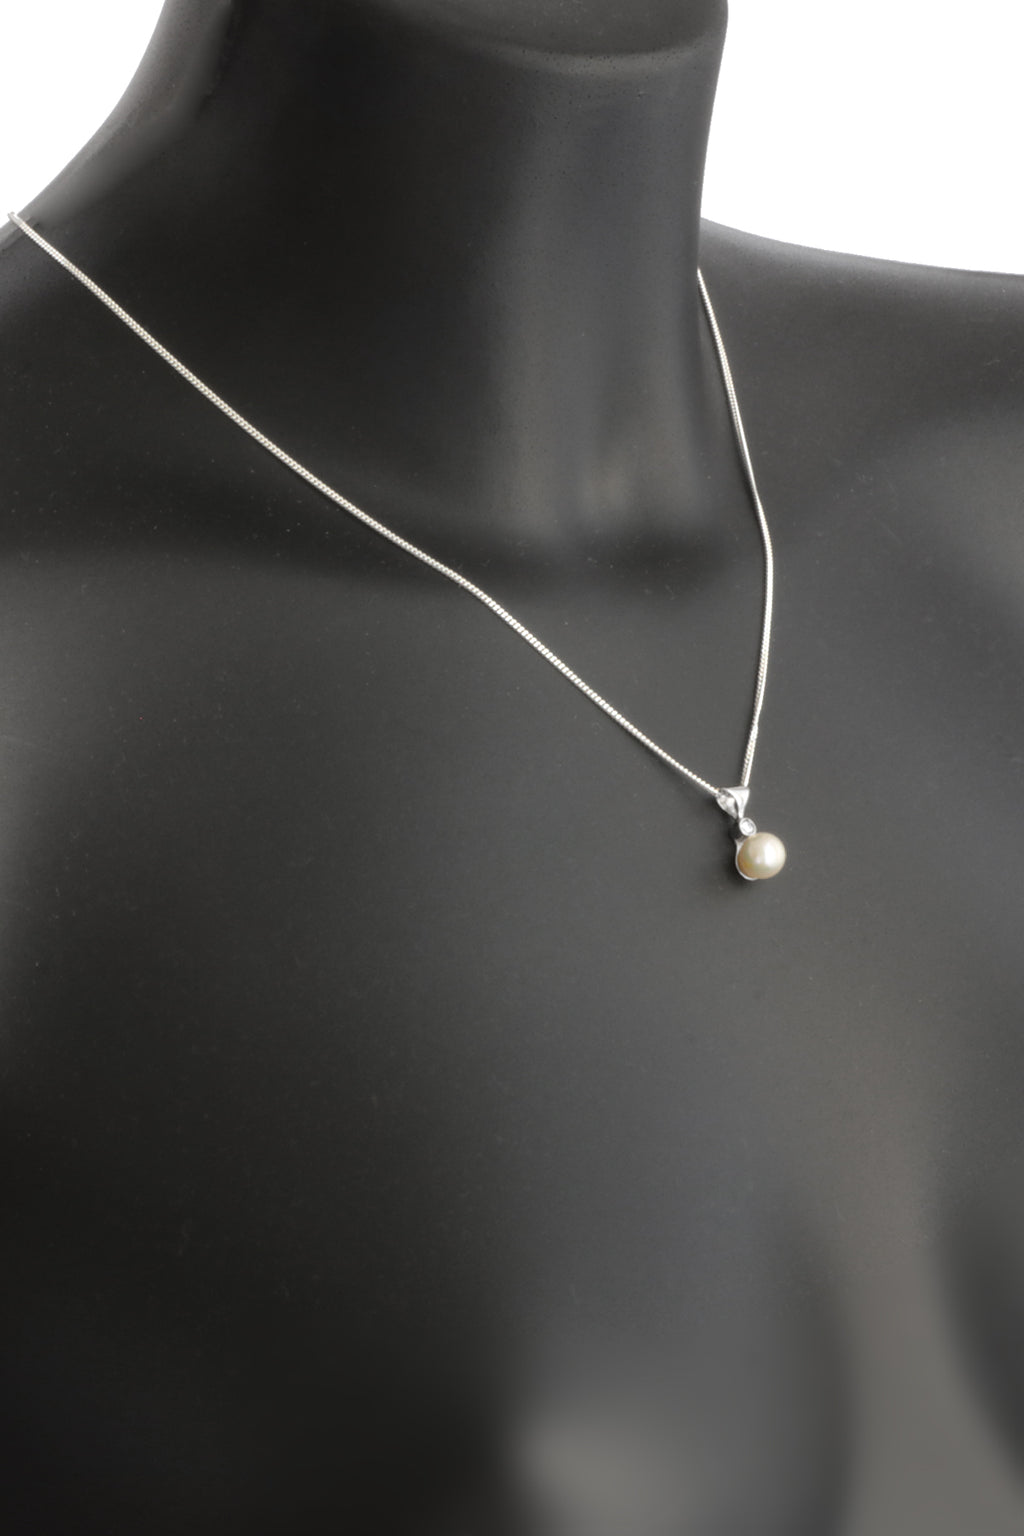 White Gold Pendant with Pearl and Diamond